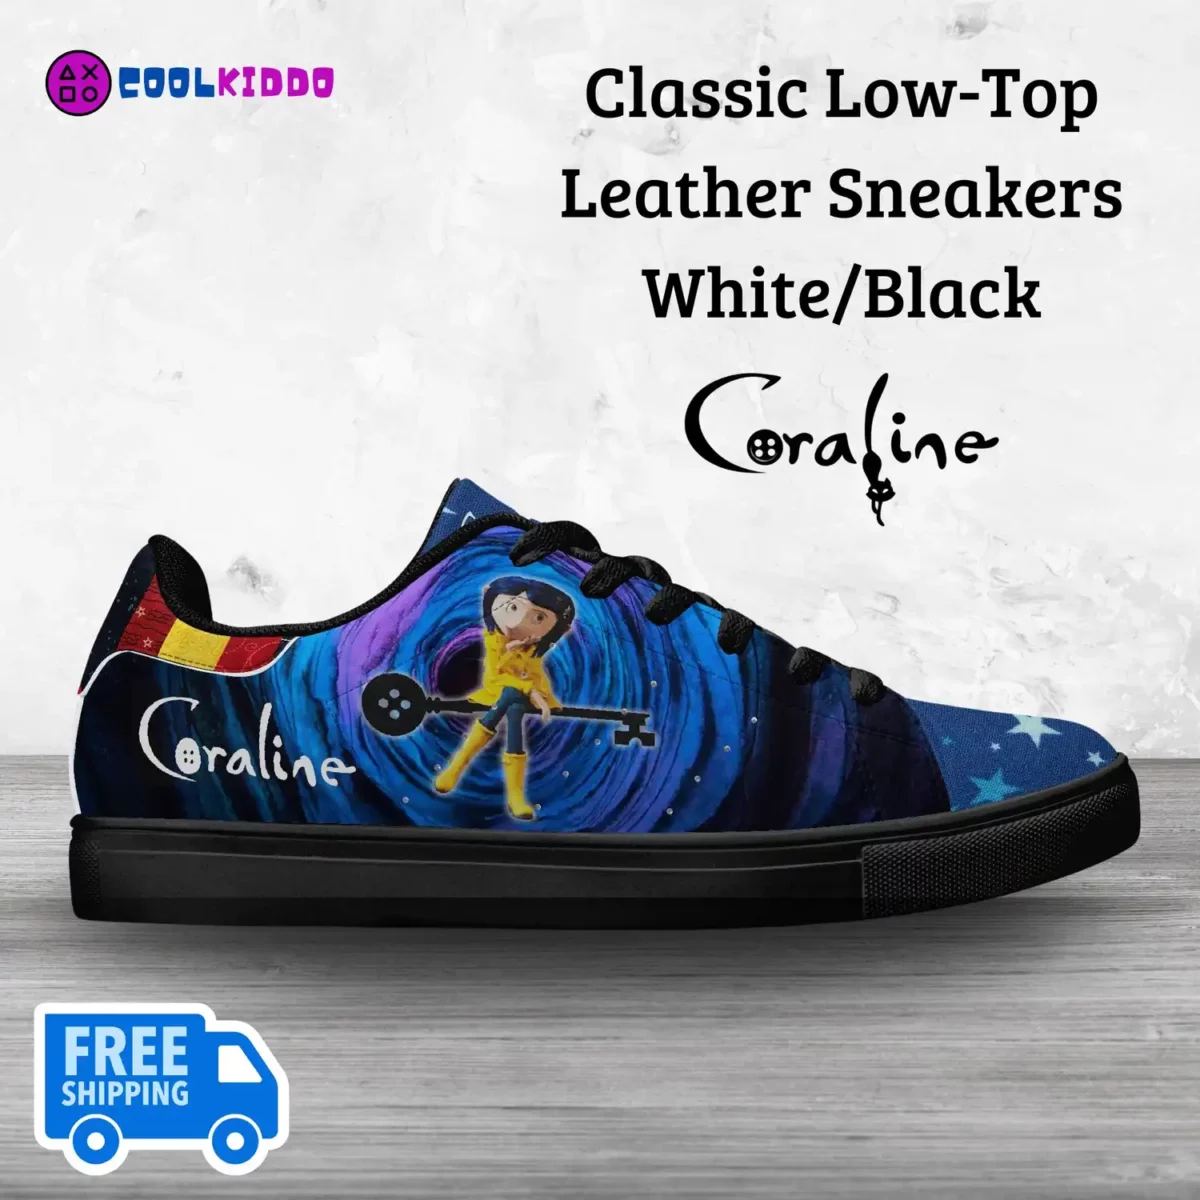 Custom Coraline Movie Inspired Classic Low-Top Leather Sneakers – White/Black – Unisex Casual Shoes Cool Kiddo 10